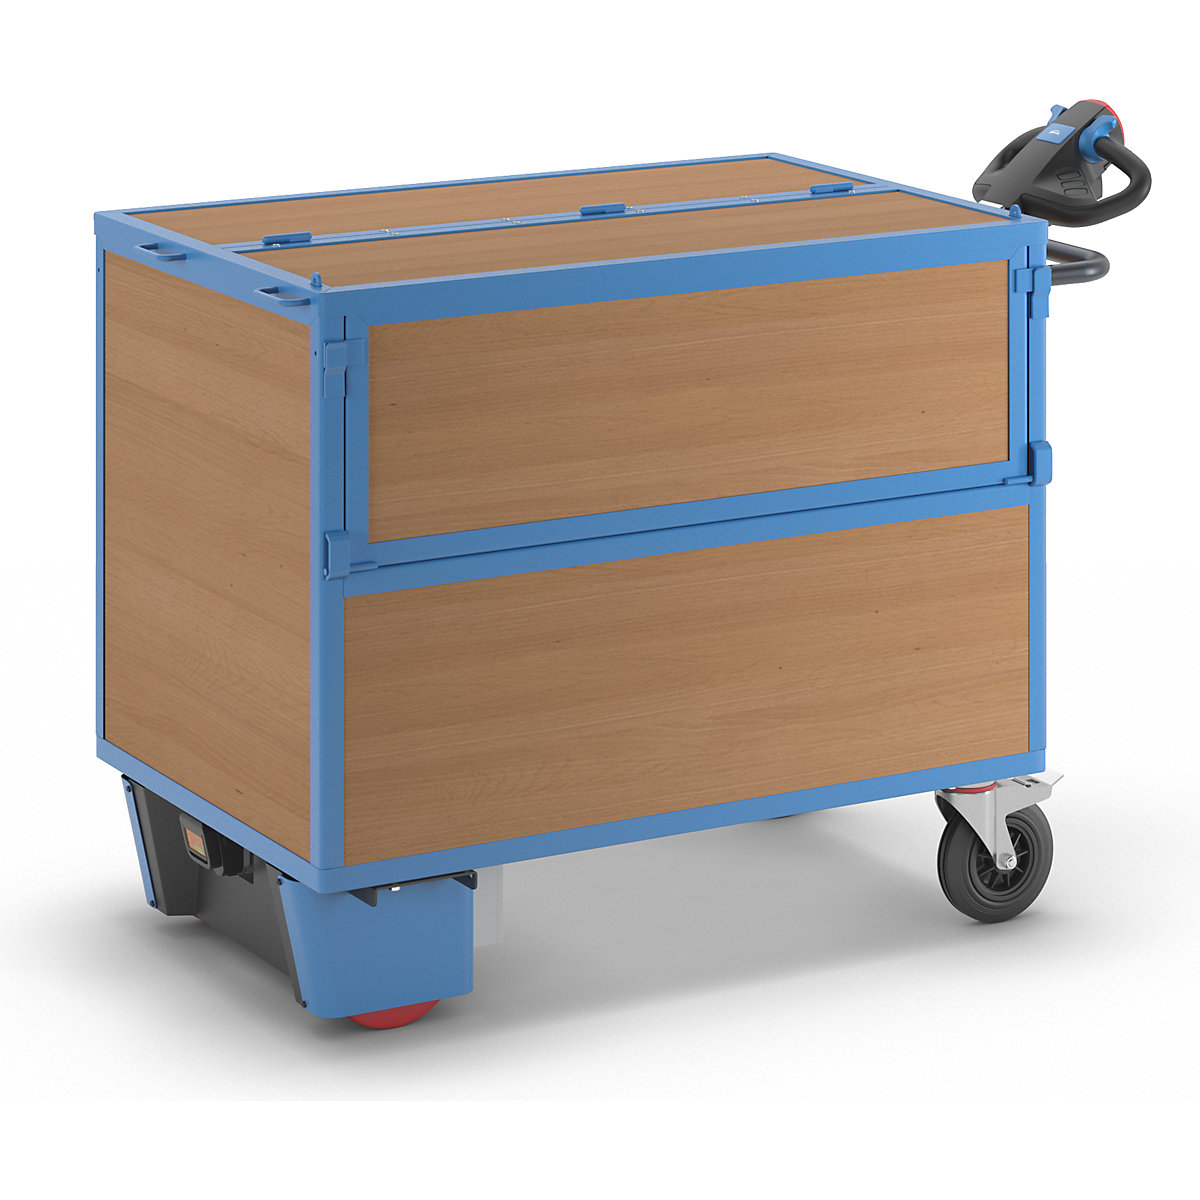 Box truck with electric drive – eurokraft pro, walls made of MDF panels, with lid, LxWxH 1630 x 830 x 1200 mm-1